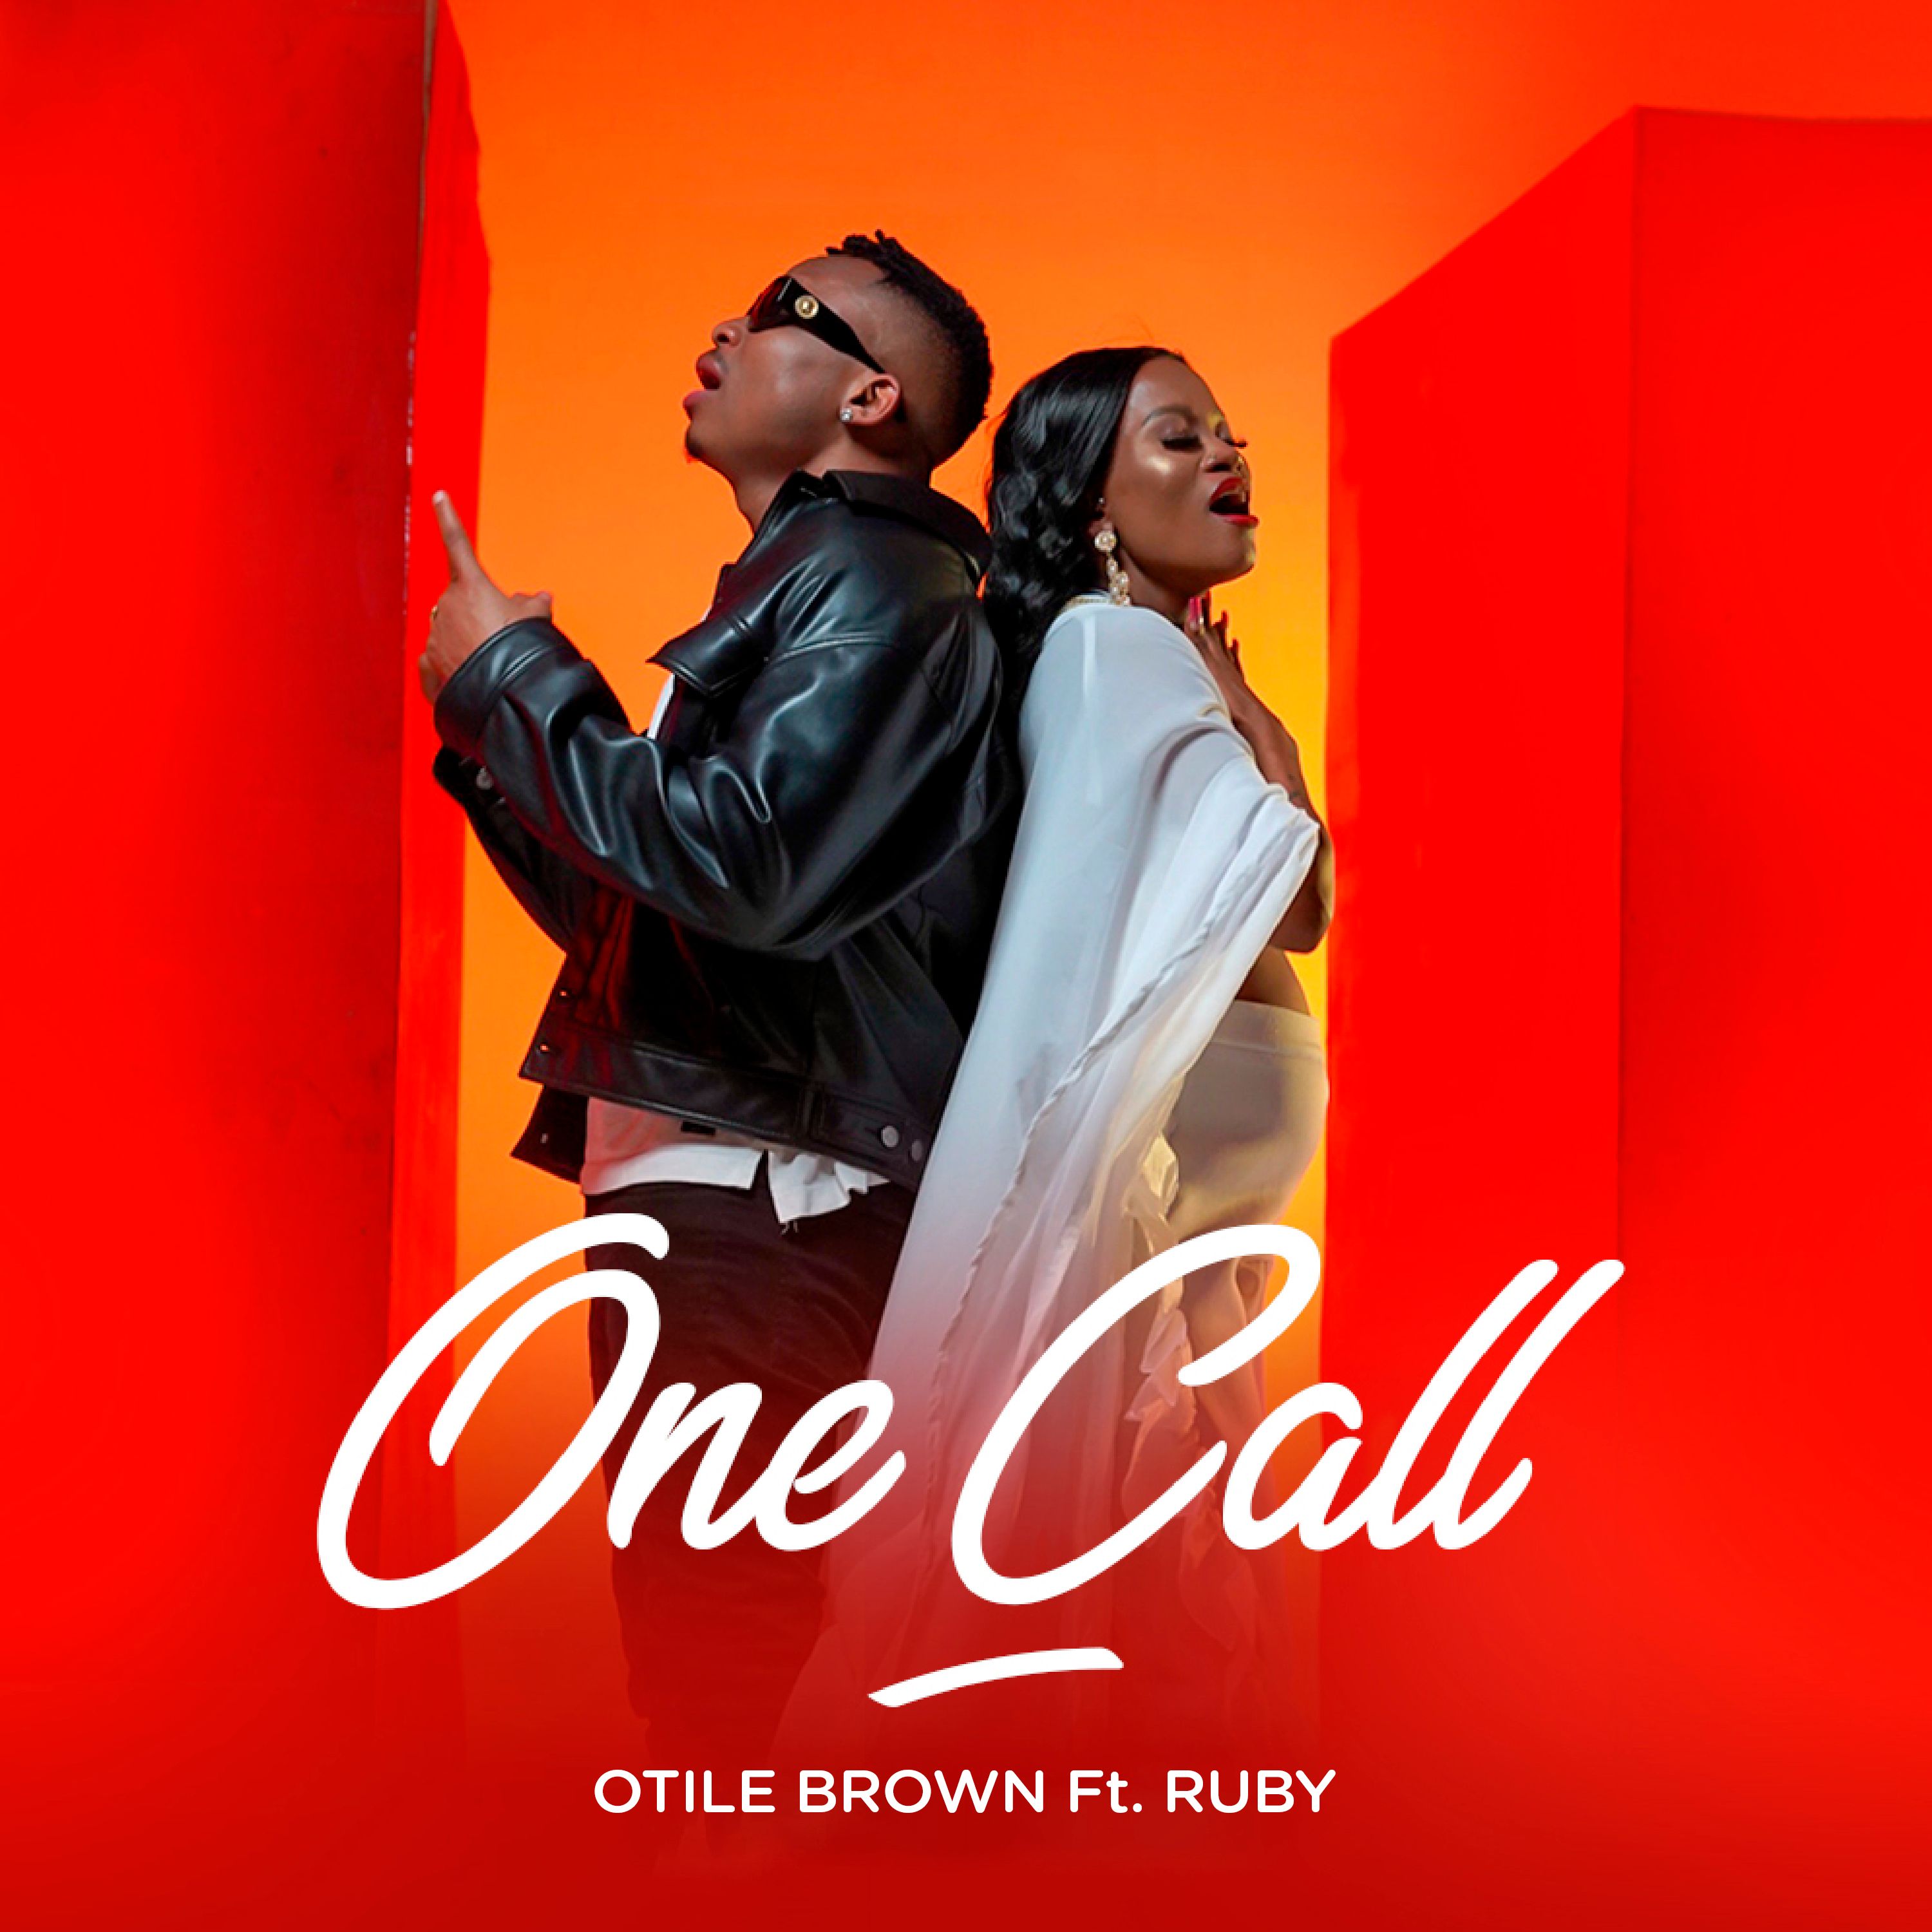 Otile Brown - One call Ft. Ruby